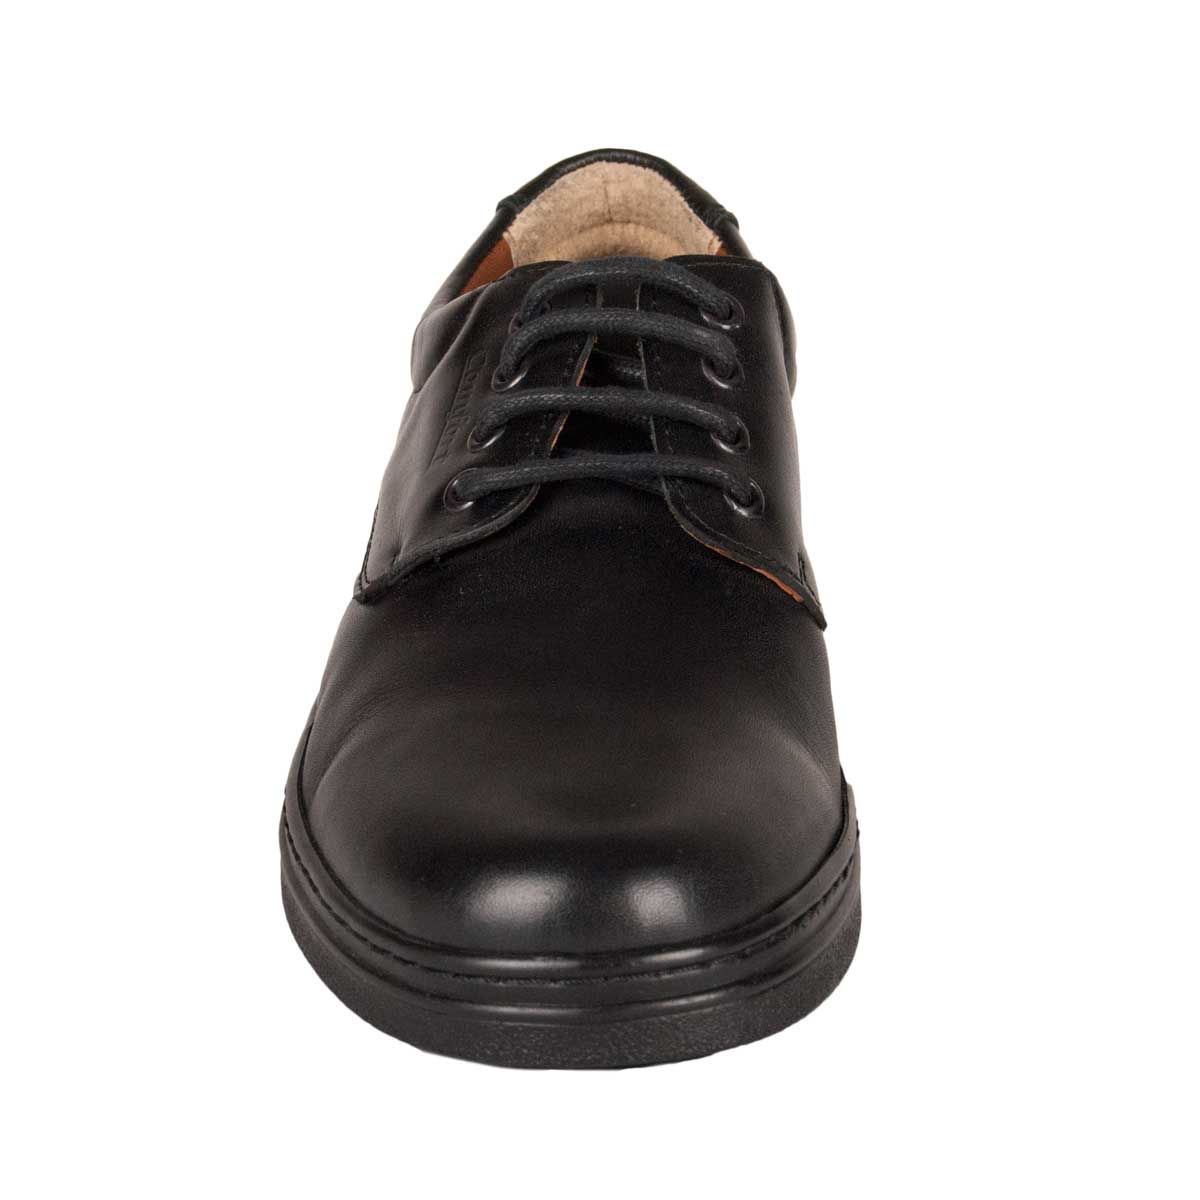 Purapiel Guarantee. 10 years of warranty. Comfortable and light leather oxford shoe for gentleman. Cordonating thick thread with metallic eyelets. Flexible Hormo. Previous and subsequent buttress, and double seam, giving the shoe greater firmness and consistency. Padded ankle area, for convenience. Interior and skin plant. Stitched floor. Anti-slip rubber sole.